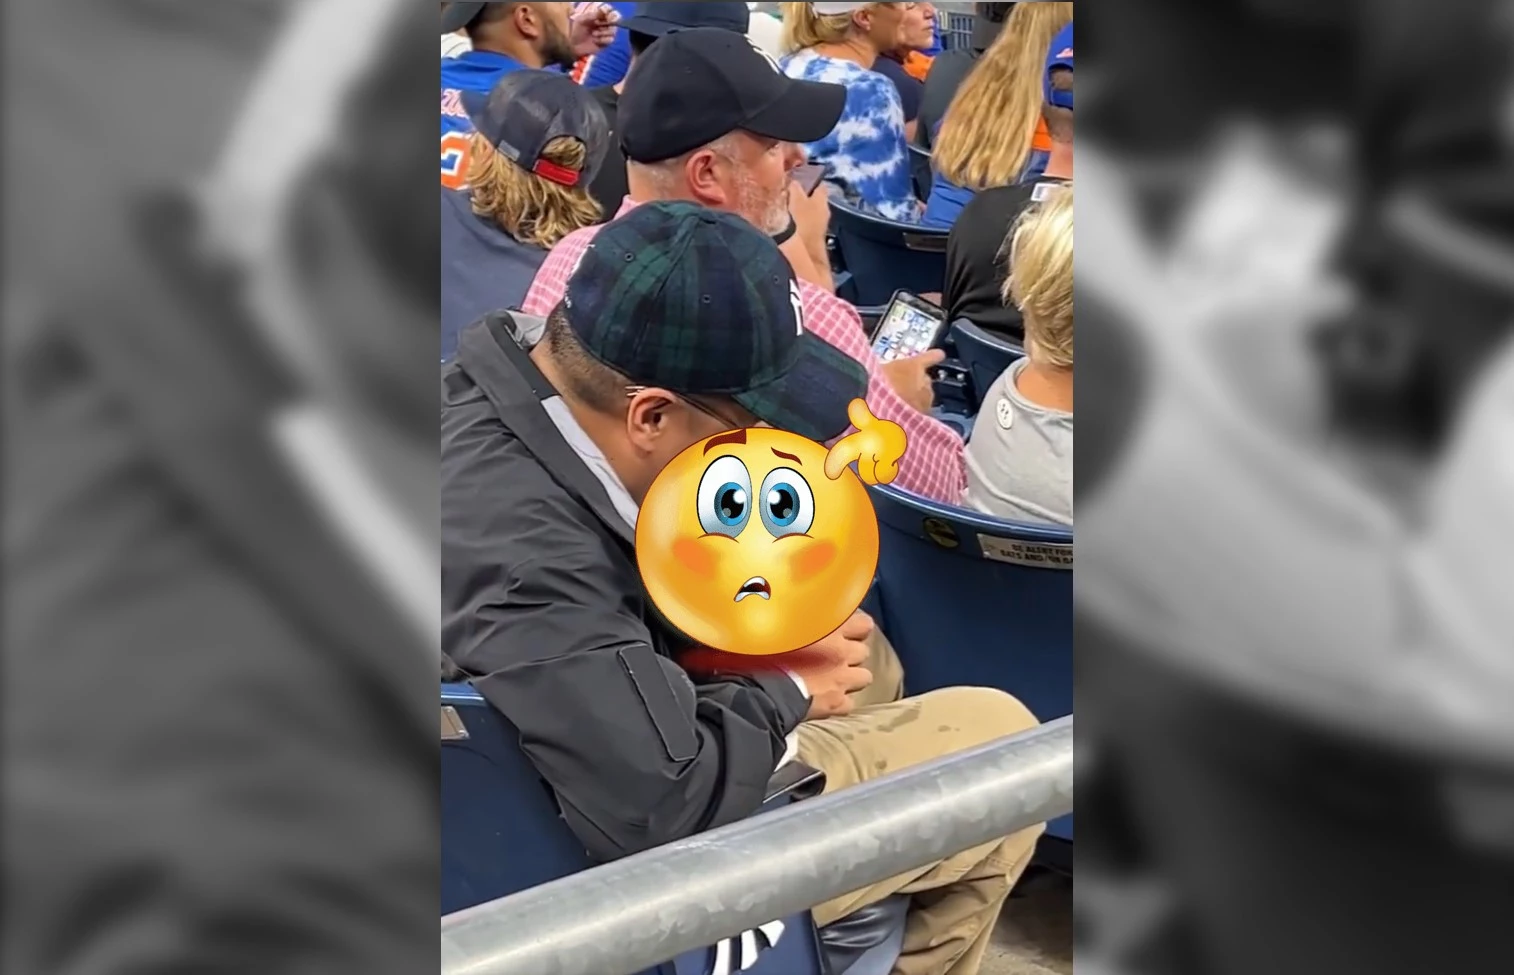 MLB News: Yankees fan goes viral for most revolting way to drink beer